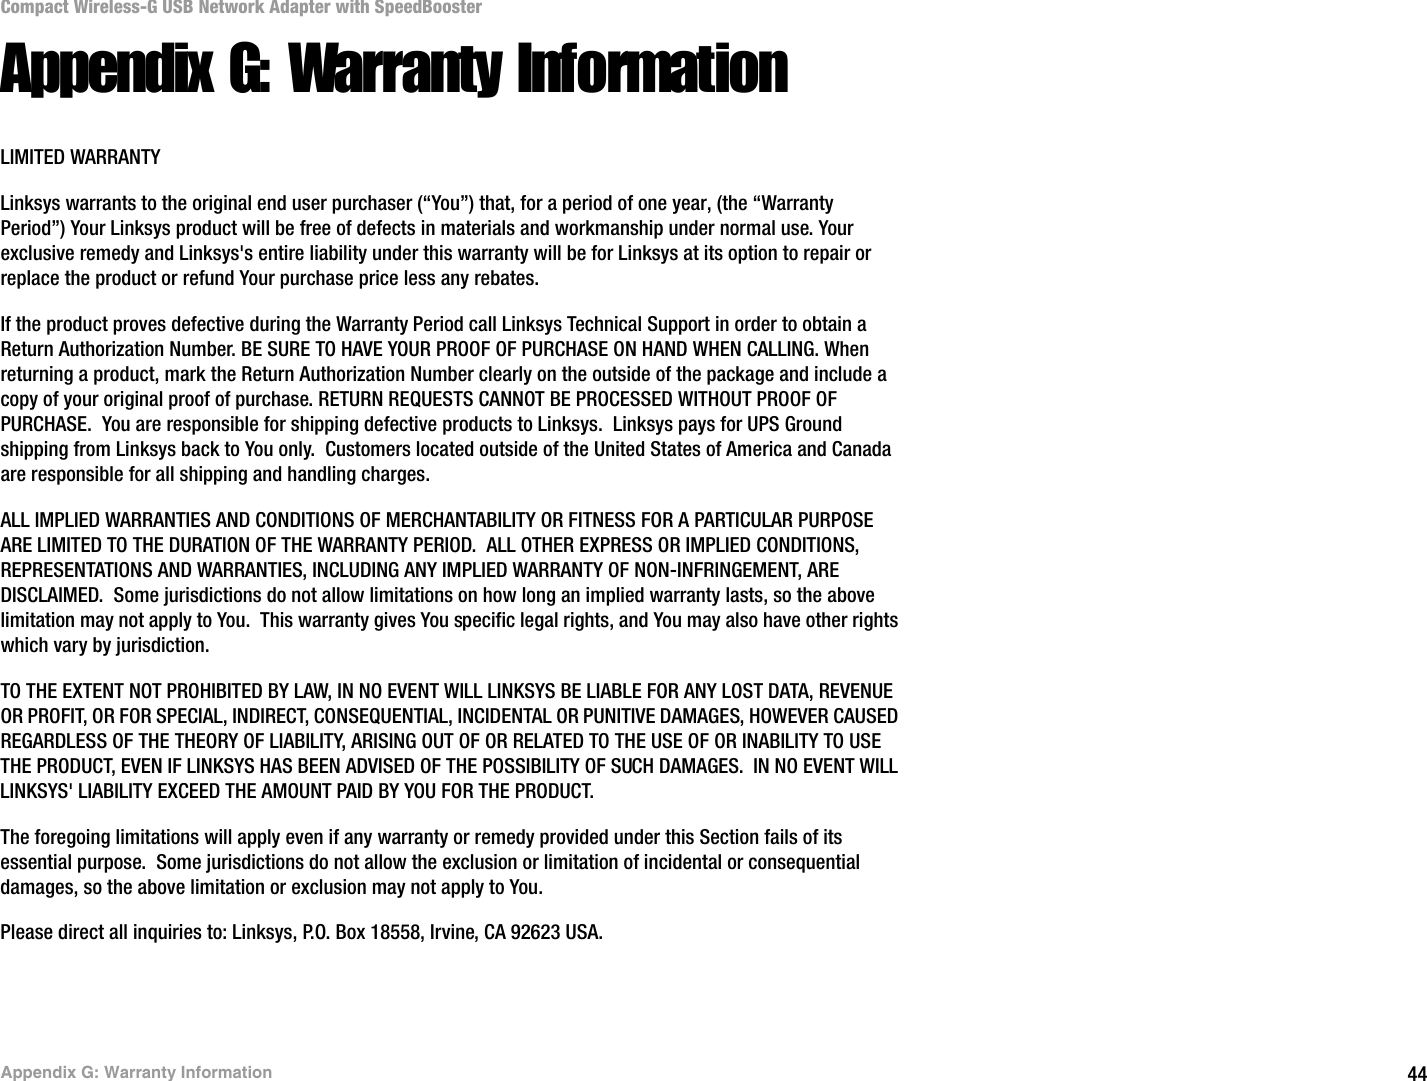 44Appendix G: Warranty InformationCompact Wireless-G USB Network Adapter with SpeedBoosterAppendix G: Warranty InformationLIMITED WARRANTYLinksys warrants to the original end user purchaser (“You”) that, for a period of one year, (the “Warranty Period”) Your Linksys product will be free of defects in materials and workmanship under normal use. Your exclusive remedy and Linksys&apos;s entire liability under this warranty will be for Linksys at its option to repair or replace the product or refund Your purchase price less any rebates.If the product proves defective during the Warranty Period call Linksys Technical Support in order to obtain a Return Authorization Number. BE SURE TO HAVE YOUR PROOF OF PURCHASE ON HAND WHEN CALLING. When returning a product, mark the Return Authorization Number clearly on the outside of the package and include a copy of your original proof of purchase. RETURN REQUESTS CANNOT BE PROCESSED WITHOUT PROOF OF PURCHASE.  You are responsible for shipping defective products to Linksys.  Linksys pays for UPS Ground shipping from Linksys back to You only.  Customers located outside of the United States of America and Canada are responsible for all shipping and handling charges. ALL IMPLIED WARRANTIES AND CONDITIONS OF MERCHANTABILITY OR FITNESS FOR A PARTICULAR PURPOSE ARE LIMITED TO THE DURATION OF THE WARRANTY PERIOD.  ALL OTHER EXPRESS OR IMPLIED CONDITIONS, REPRESENTATIONS AND WARRANTIES, INCLUDING ANY IMPLIED WARRANTY OF NON-INFRINGEMENT, ARE DISCLAIMED.  Some jurisdictions do not allow limitations on how long an implied warranty lasts, so the above limitation may not apply to You.  This warranty gives You specific legal rights, and You may also have other rights which vary by jurisdiction.TO THE EXTENT NOT PROHIBITED BY LAW, IN NO EVENT WILL LINKSYS BE LIABLE FOR ANY LOST DATA, REVENUE OR PROFIT, OR FOR SPECIAL, INDIRECT, CONSEQUENTIAL, INCIDENTAL OR PUNITIVE DAMAGES, HOWEVER CAUSED REGARDLESS OF THE THEORY OF LIABILITY, ARISING OUT OF OR RELATED TO THE USE OF OR INABILITY TO USE THE PRODUCT, EVEN IF LINKSYS HAS BEEN ADVISED OF THE POSSIBILITY OF SUCH DAMAGES.  IN NO EVENT WILL LINKSYS&apos; LIABILITY EXCEED THE AMOUNT PAID BY YOU FOR THE PRODUCT.  The foregoing limitations will apply even if any warranty or remedy provided under this Section fails of its essential purpose.  Some jurisdictions do not allow the exclusion or limitation of incidental or consequential damages, so the above limitation or exclusion may not apply to You.Please direct all inquiries to: Linksys, P.O. Box 18558, Irvine, CA 92623 USA.